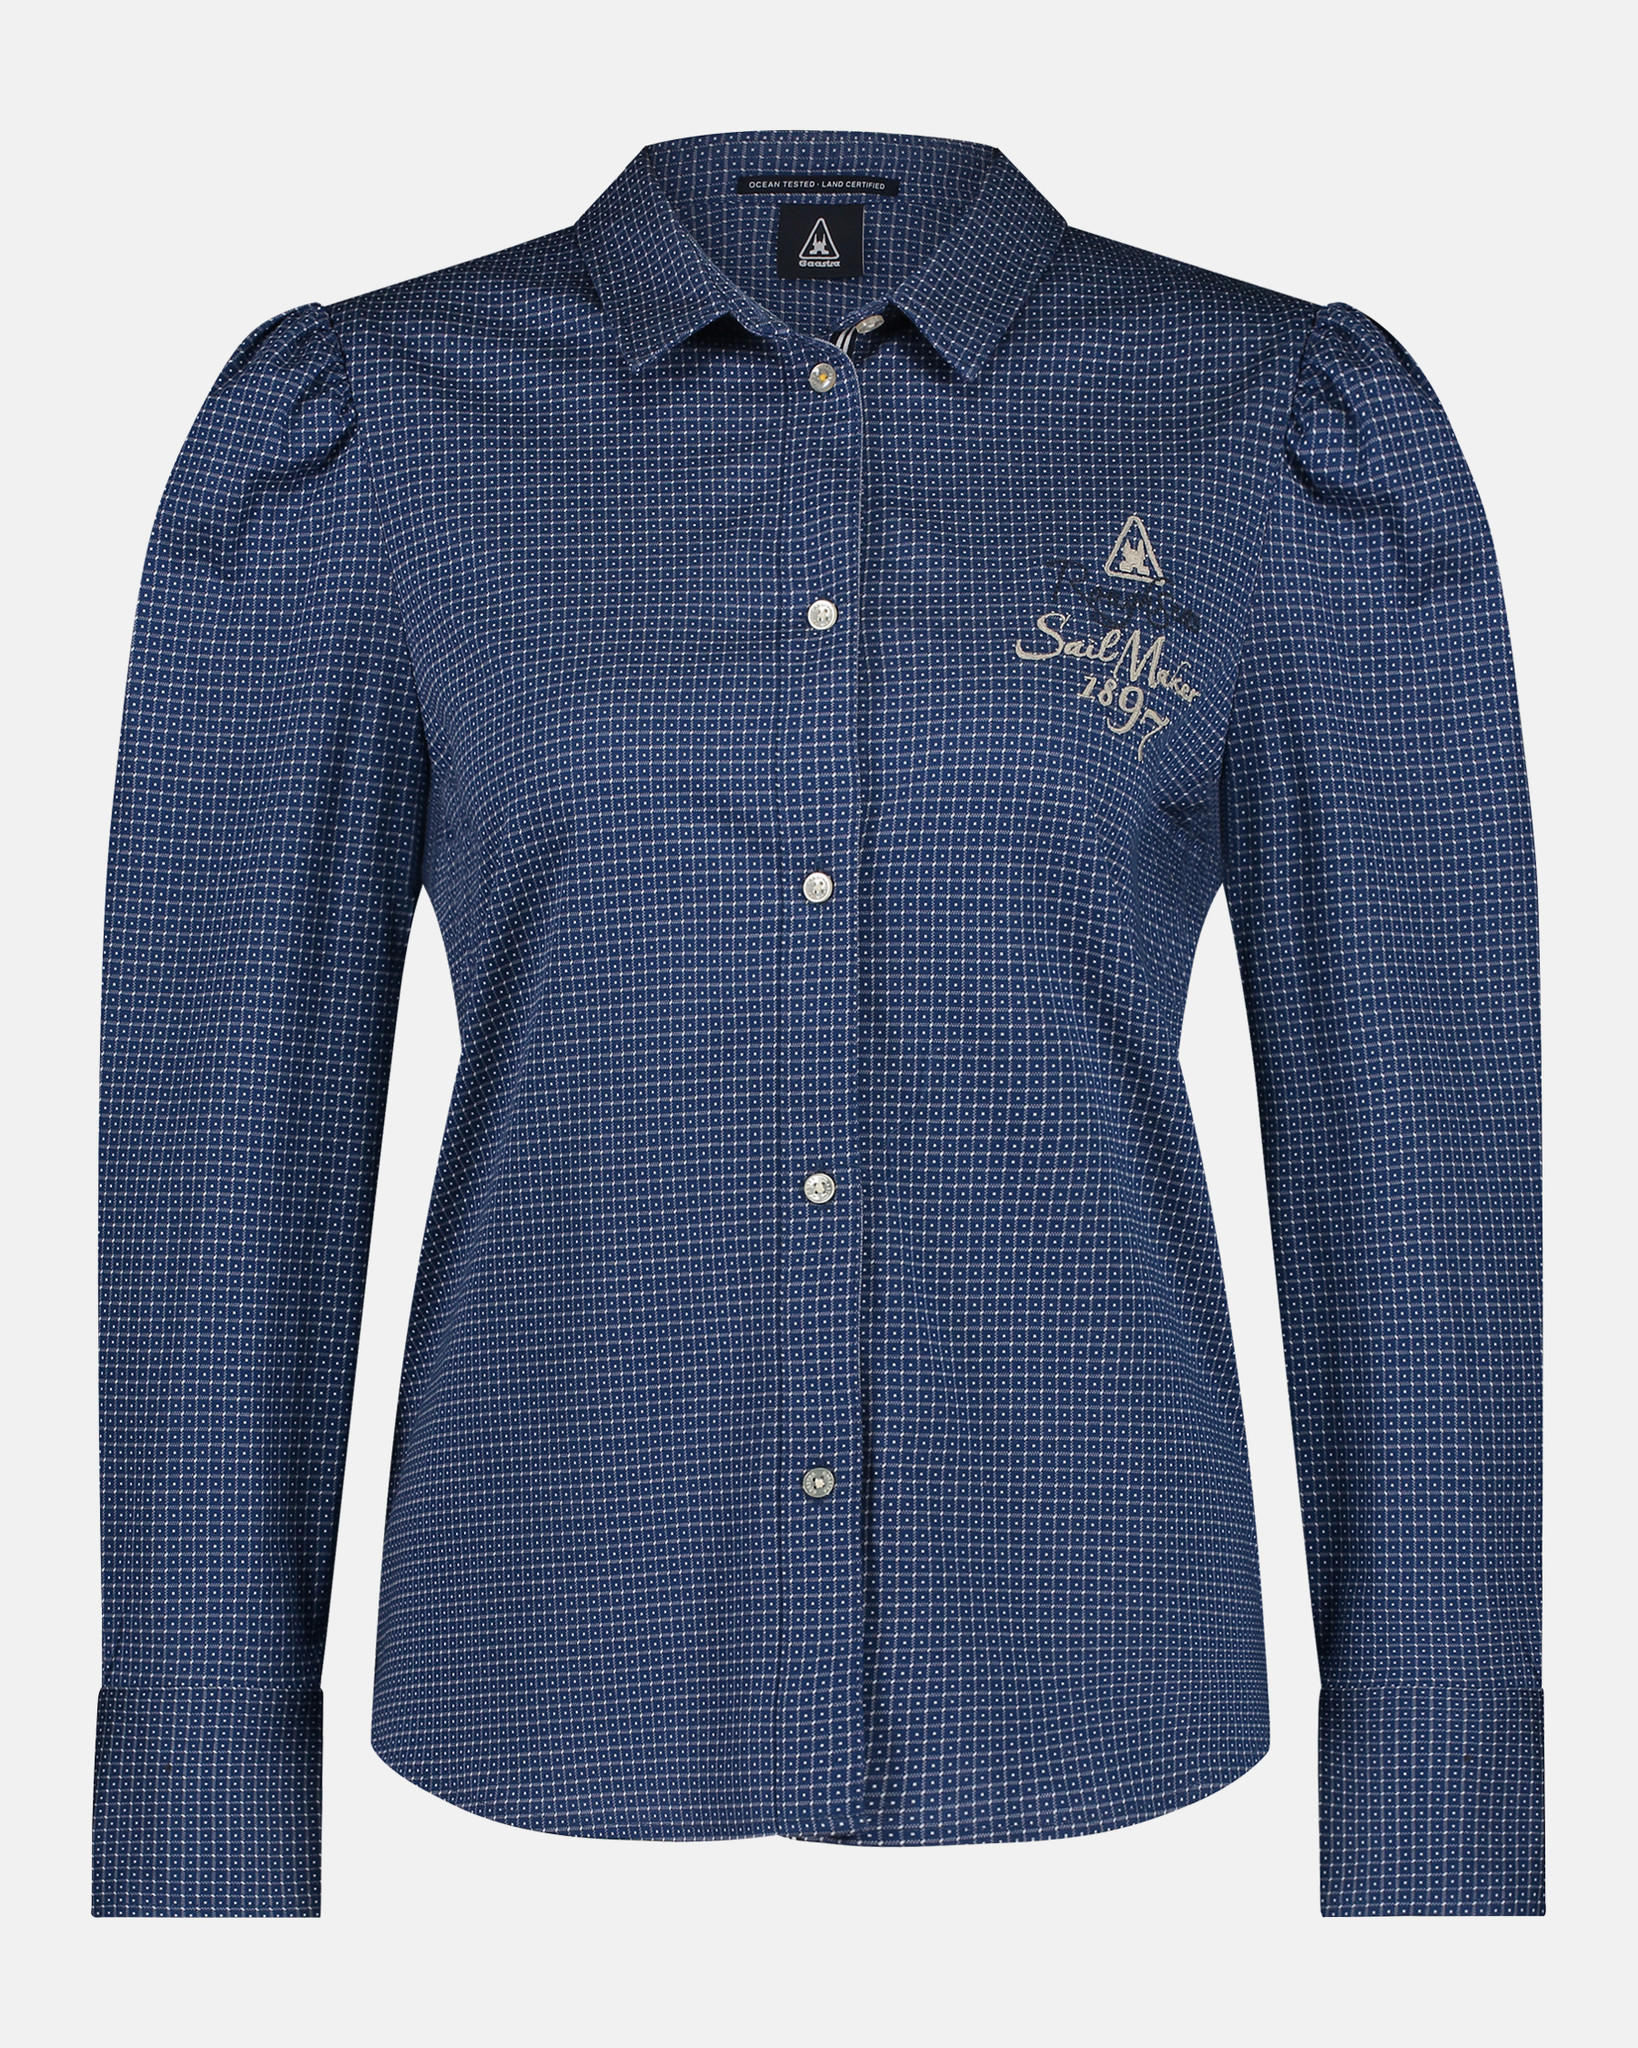 The stylish Mustique shirt Navy